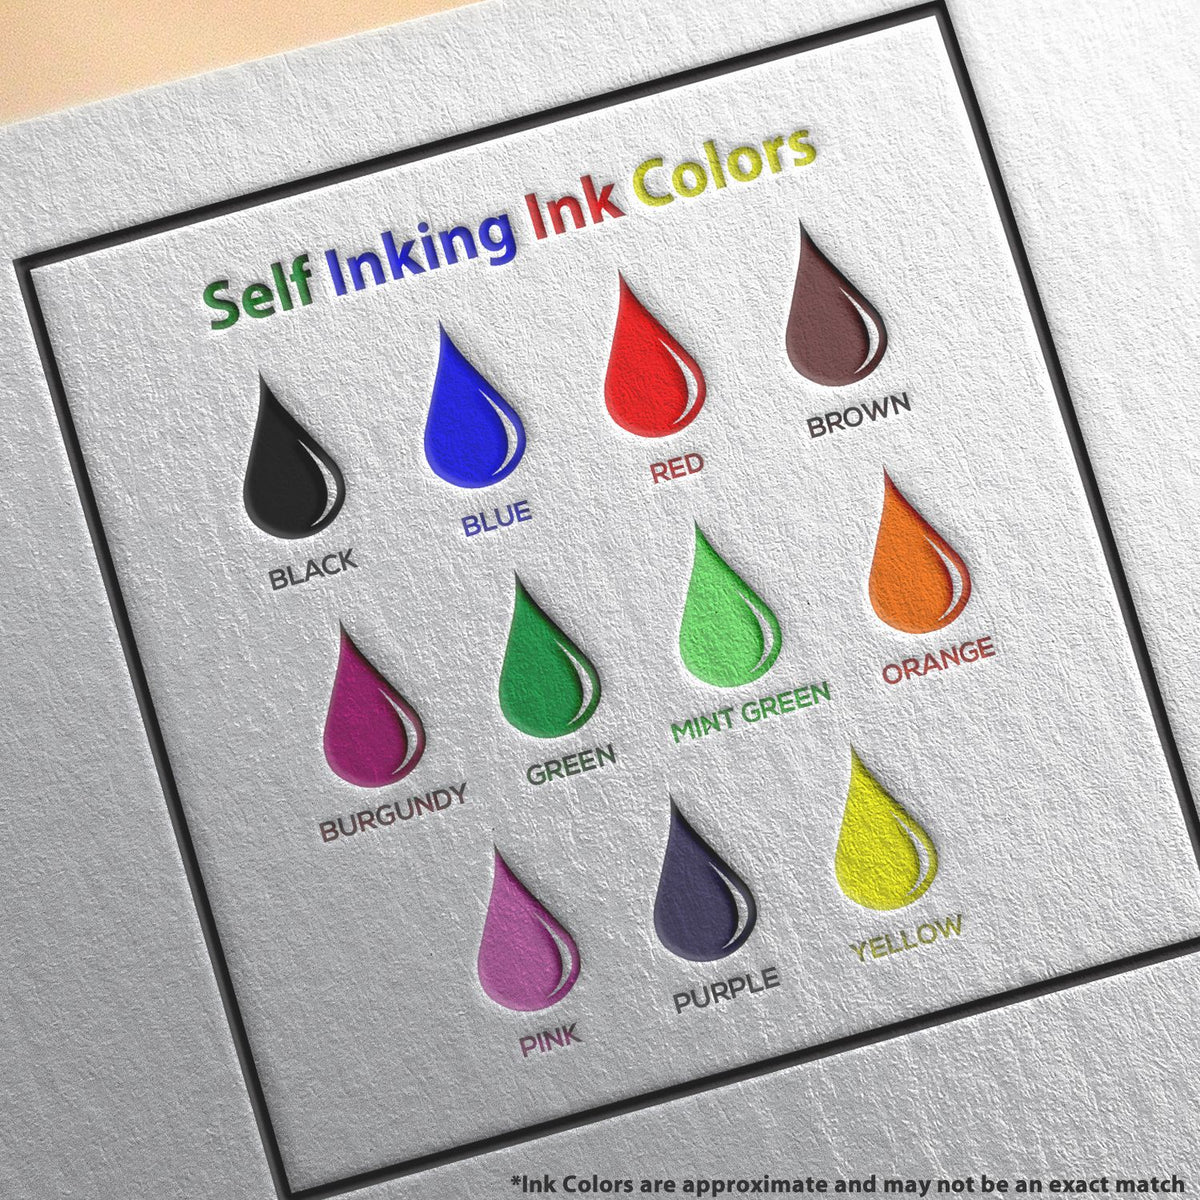 A picture showing the different ink colors or hues available for the Self-Inking Missouri Landscape Architect Stamp product.